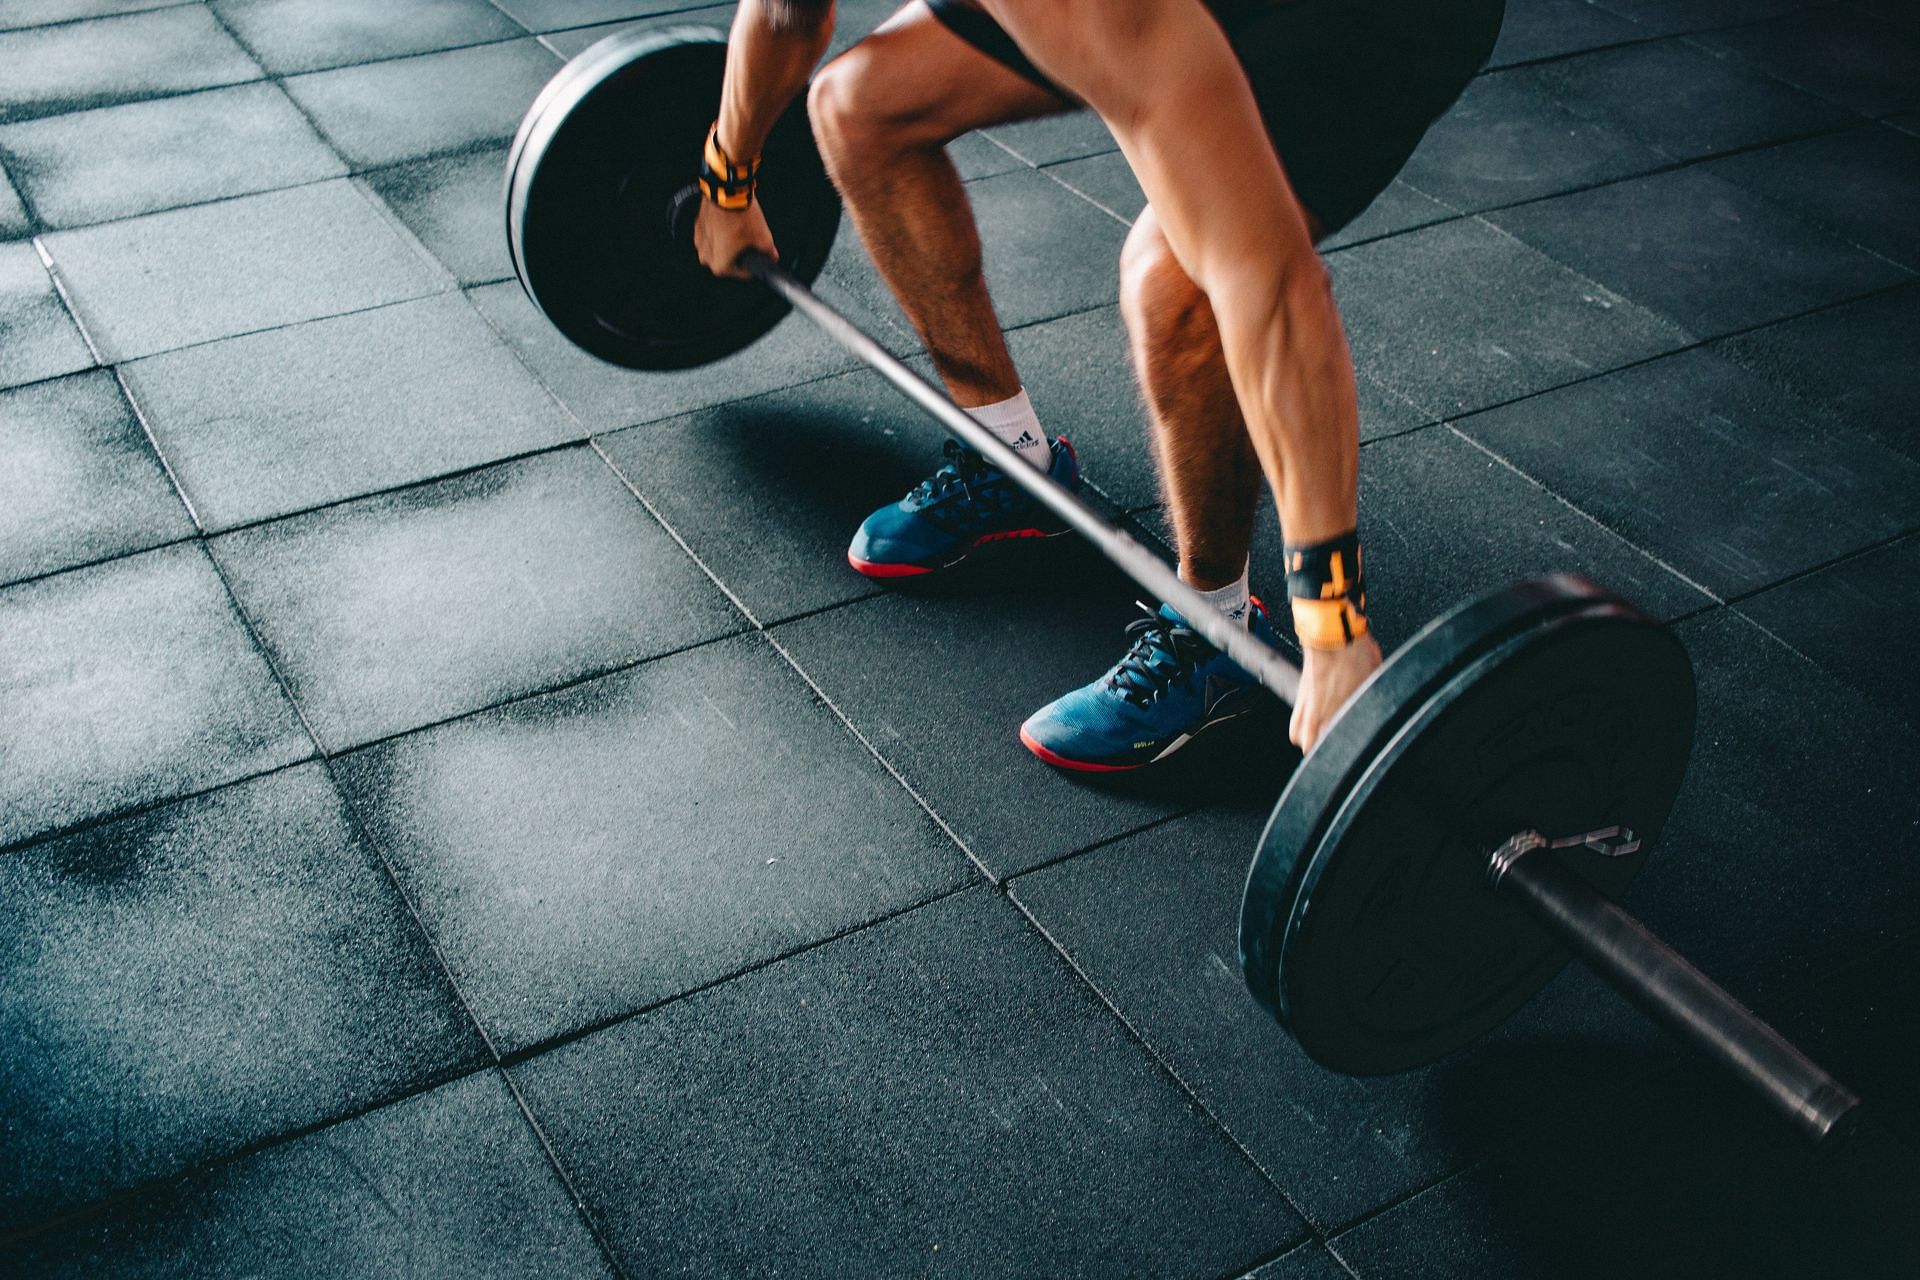 Importance of understanding the worst exercises to avoid (image sourced via Pexels / Photo by victor)